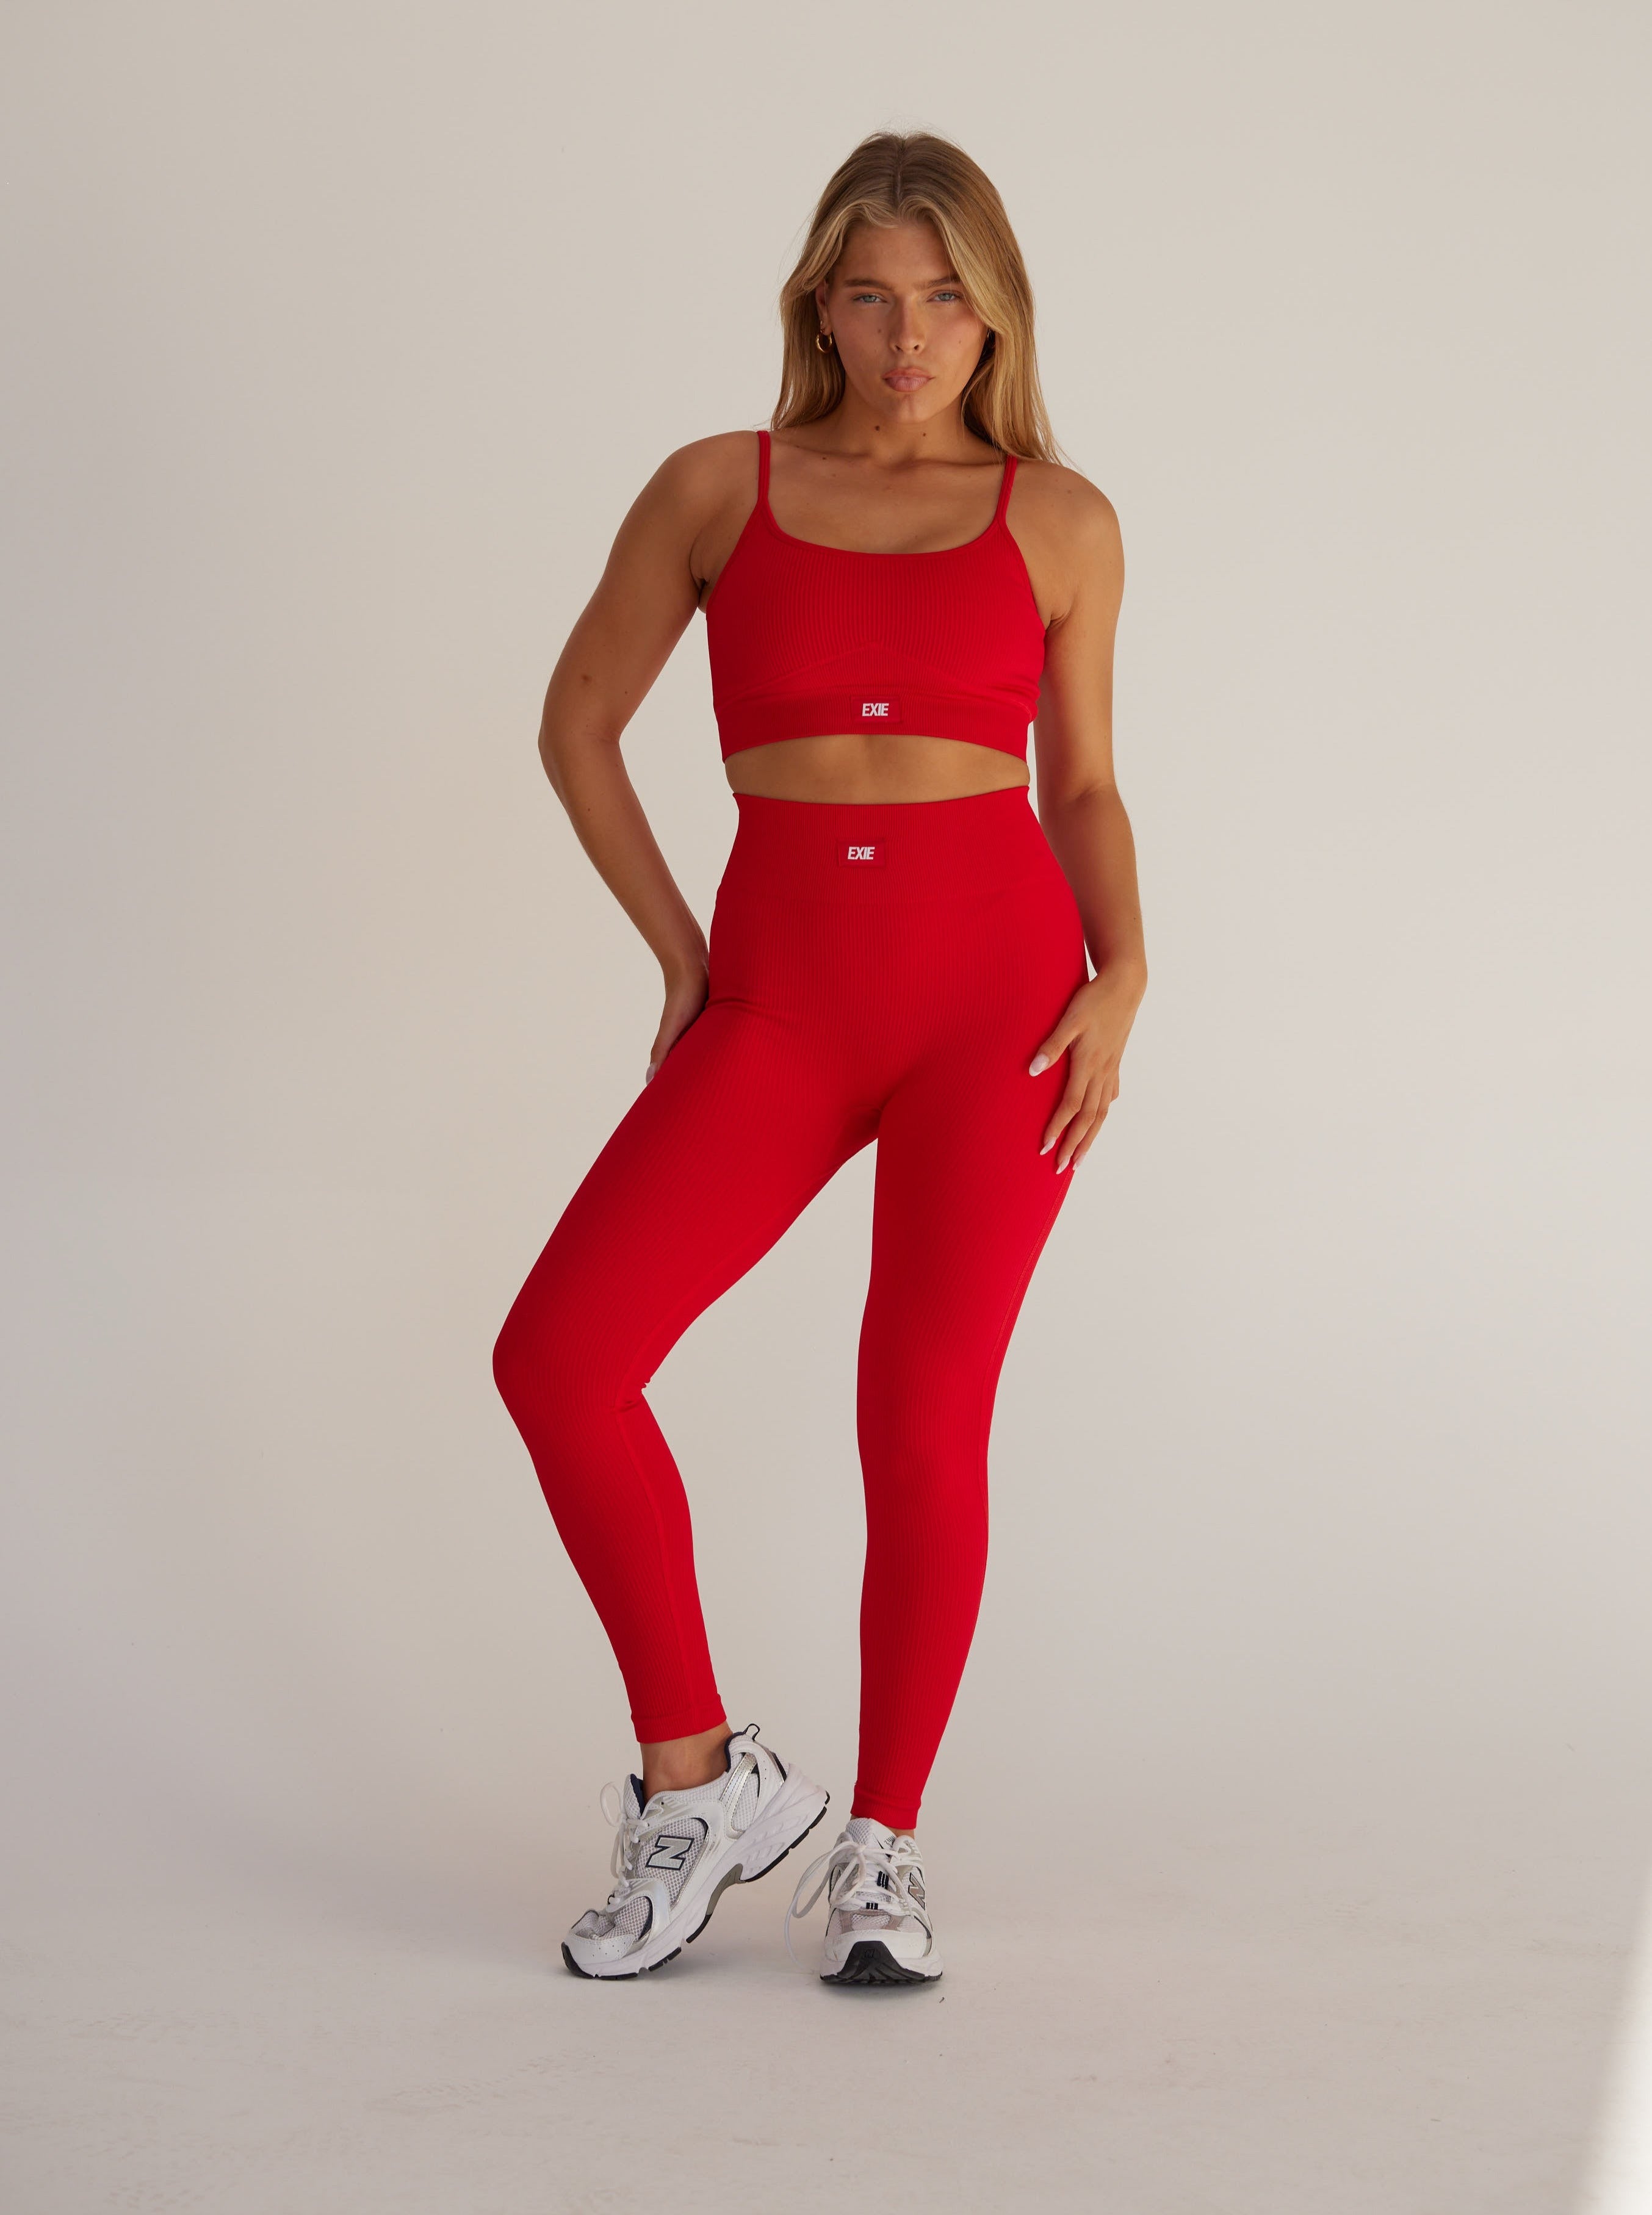 FREQUENCY LEGGINGS - RED